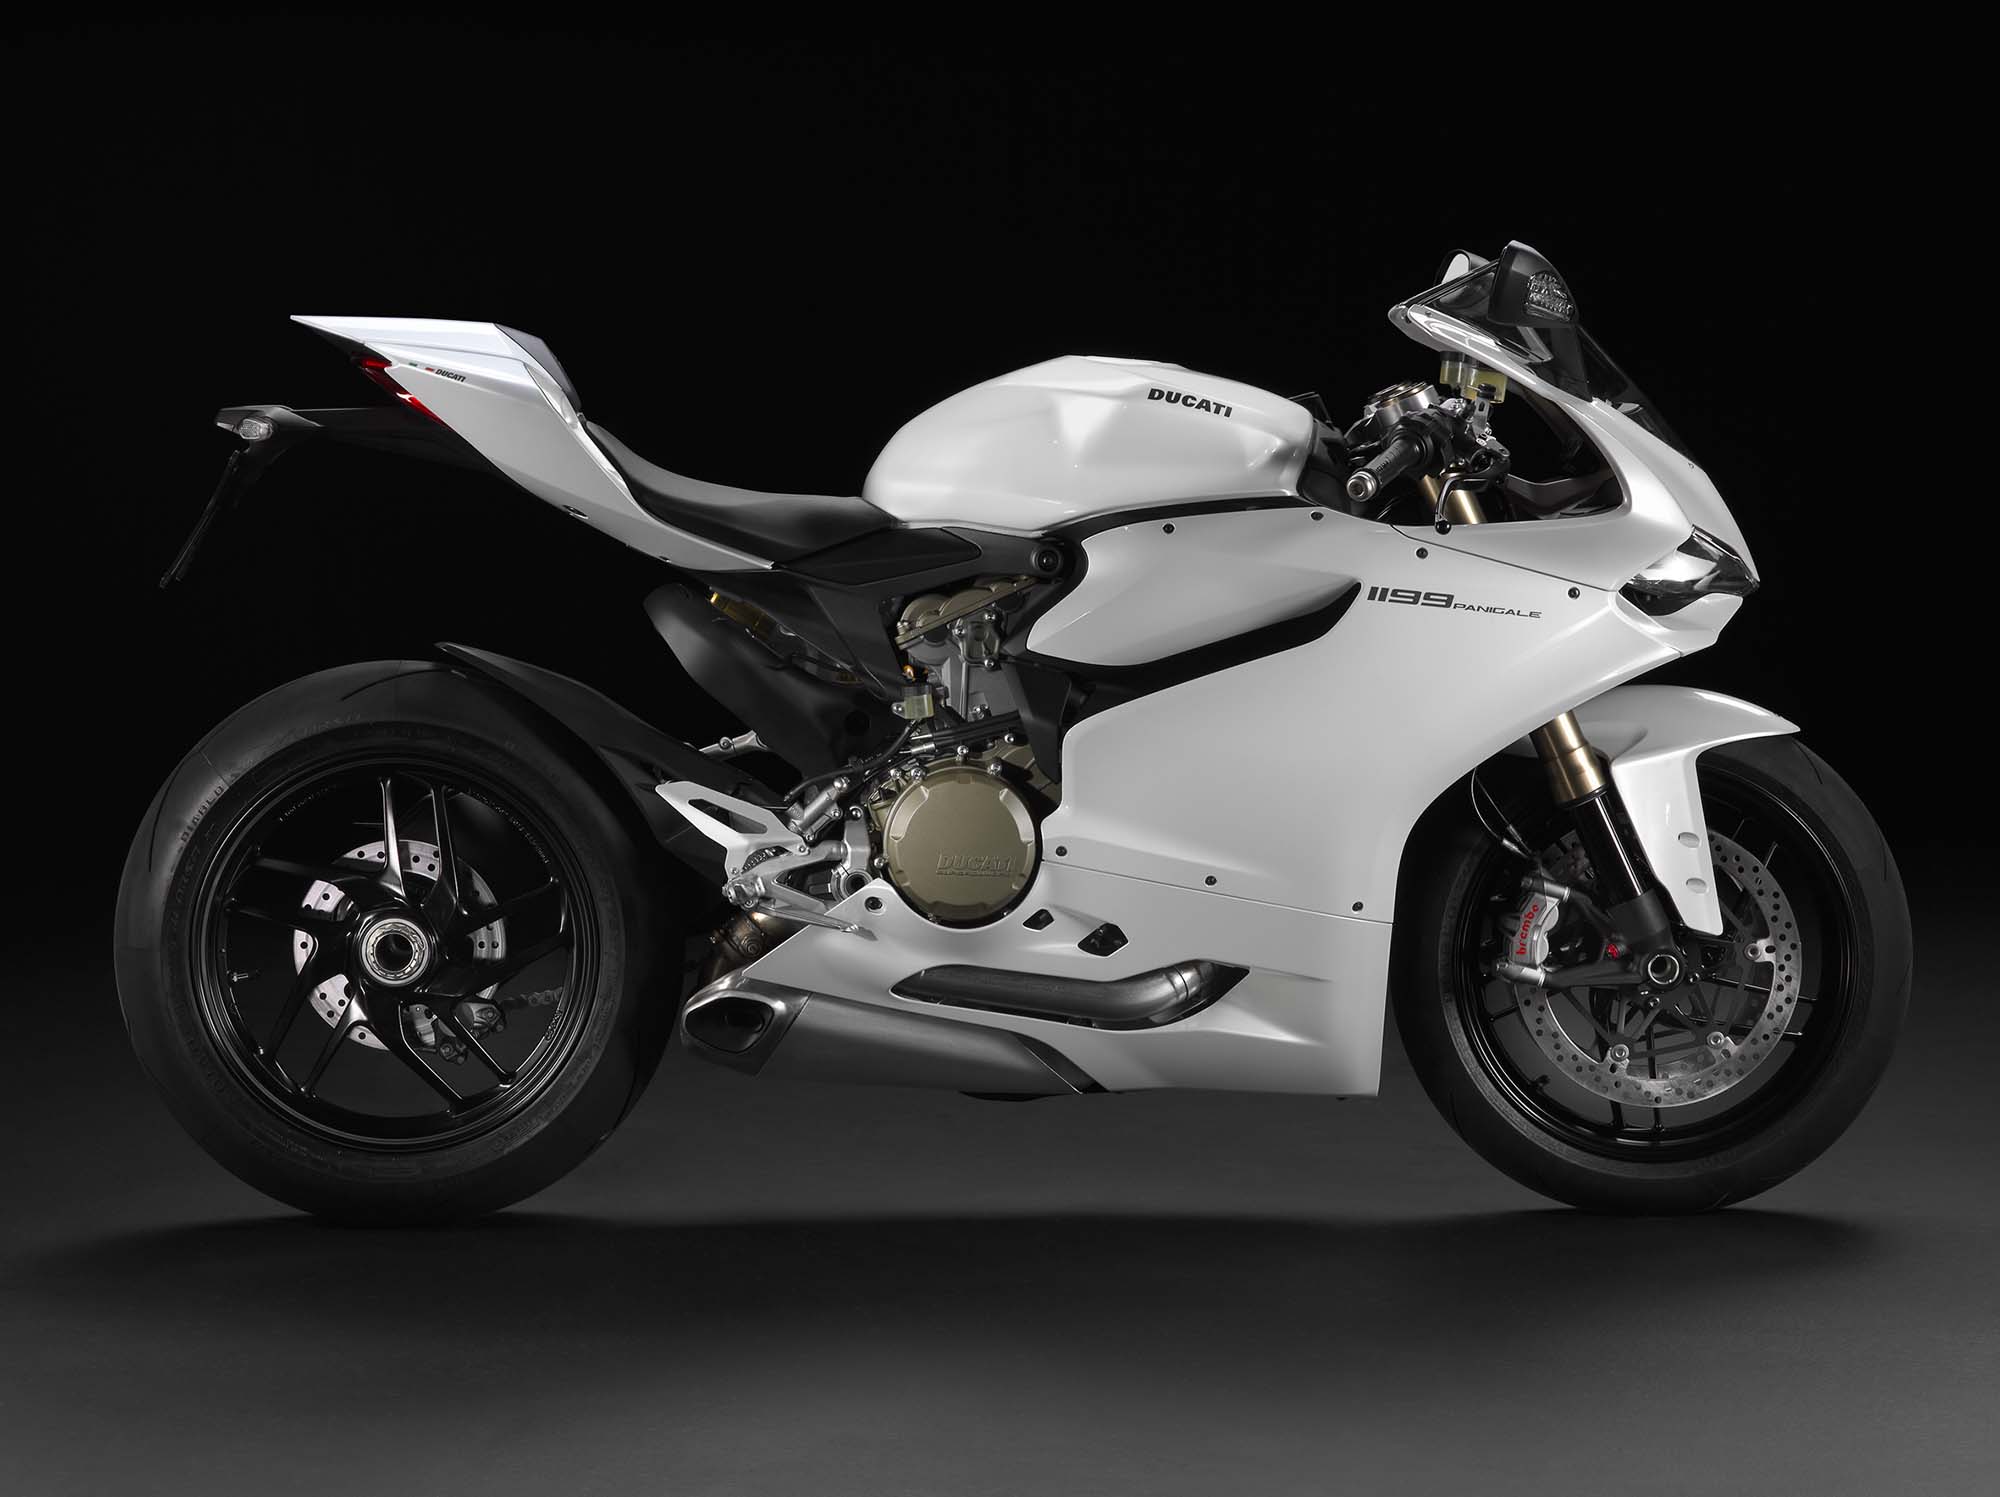 2013 Ducati 1199 Panigale - Now in Arctic White - Asphalt & Rubber